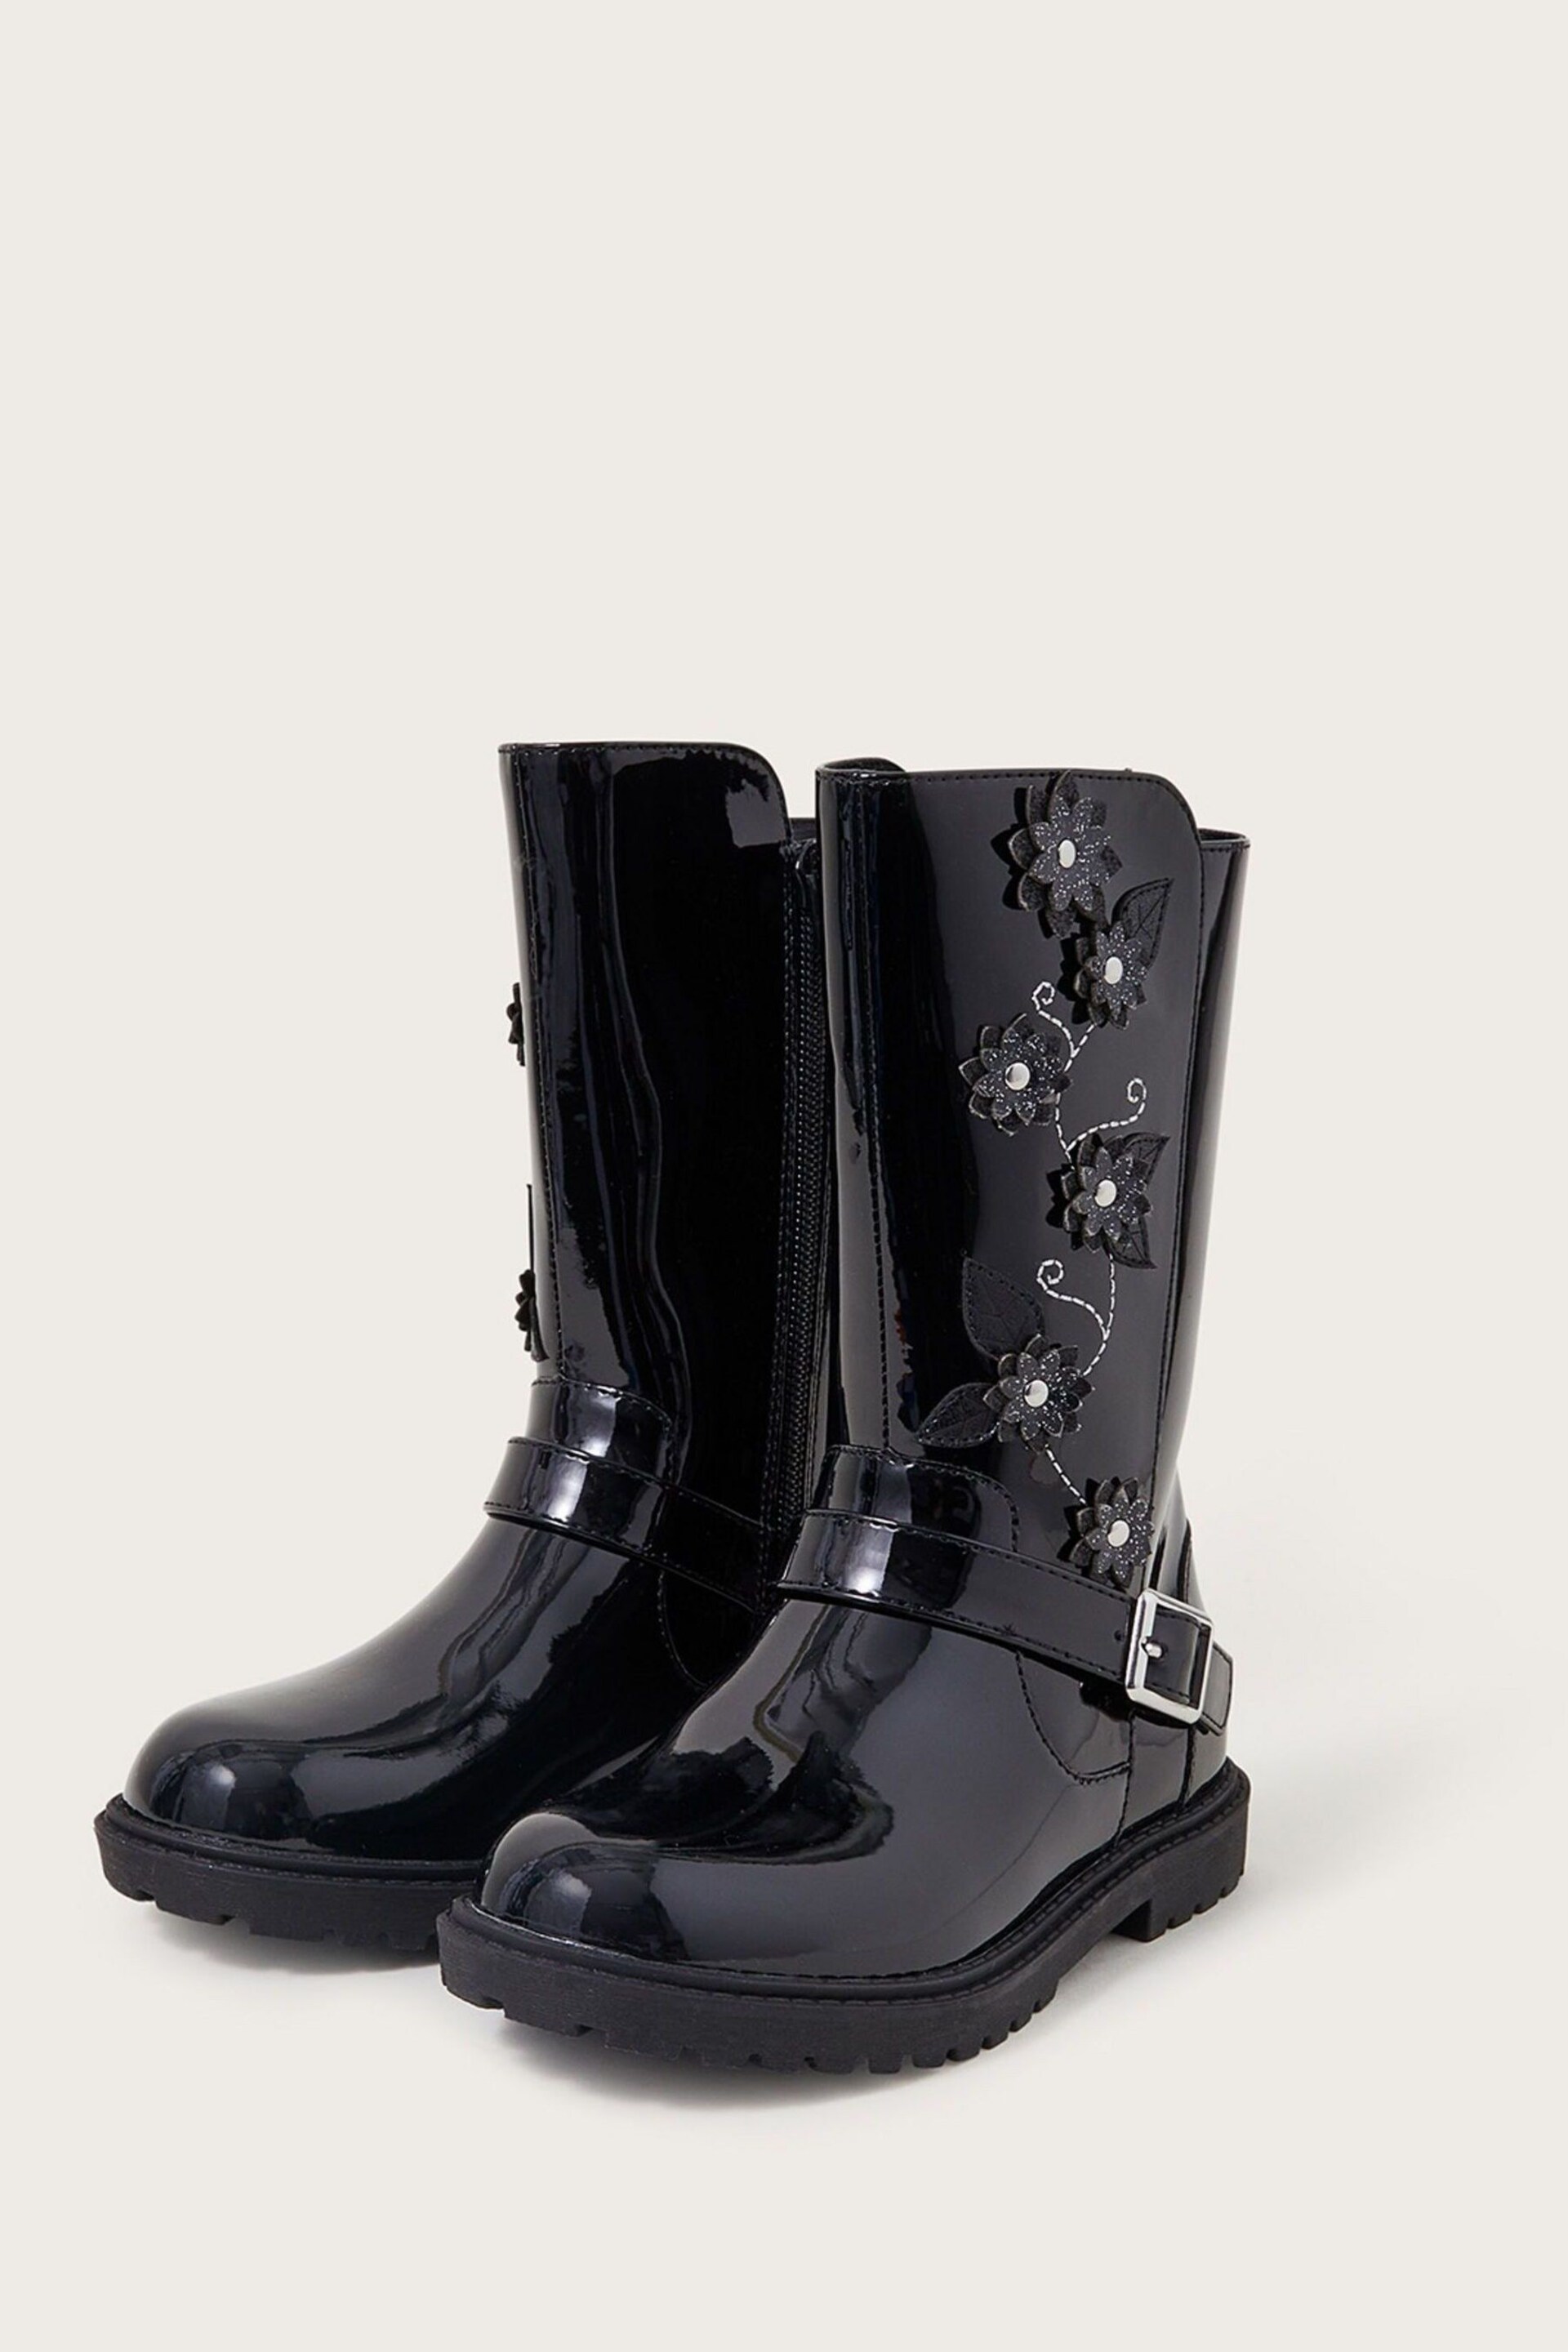 Monsoon Black Flower Detail Riding Boots - Image 1 of 3